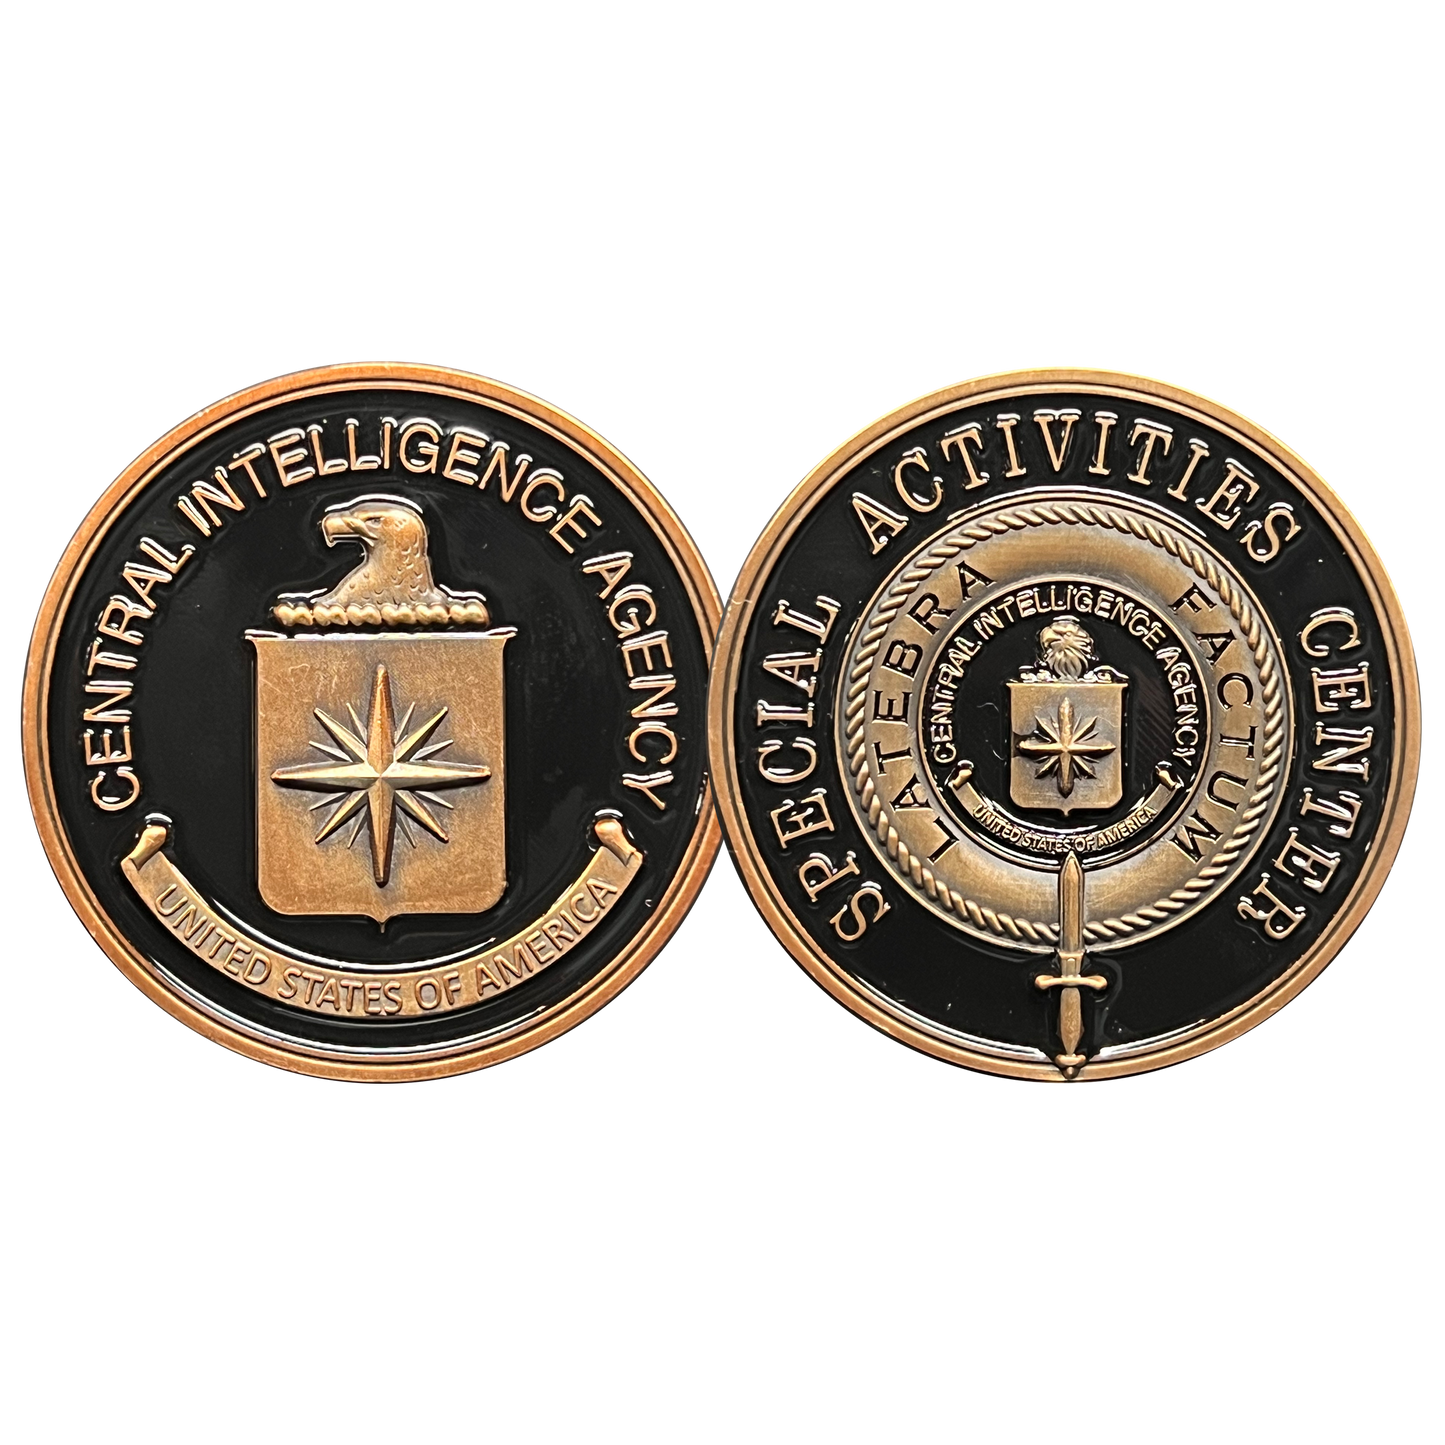 GL14-007 Central Intelligence Agency CIA Challenge Coin Special Activities Center